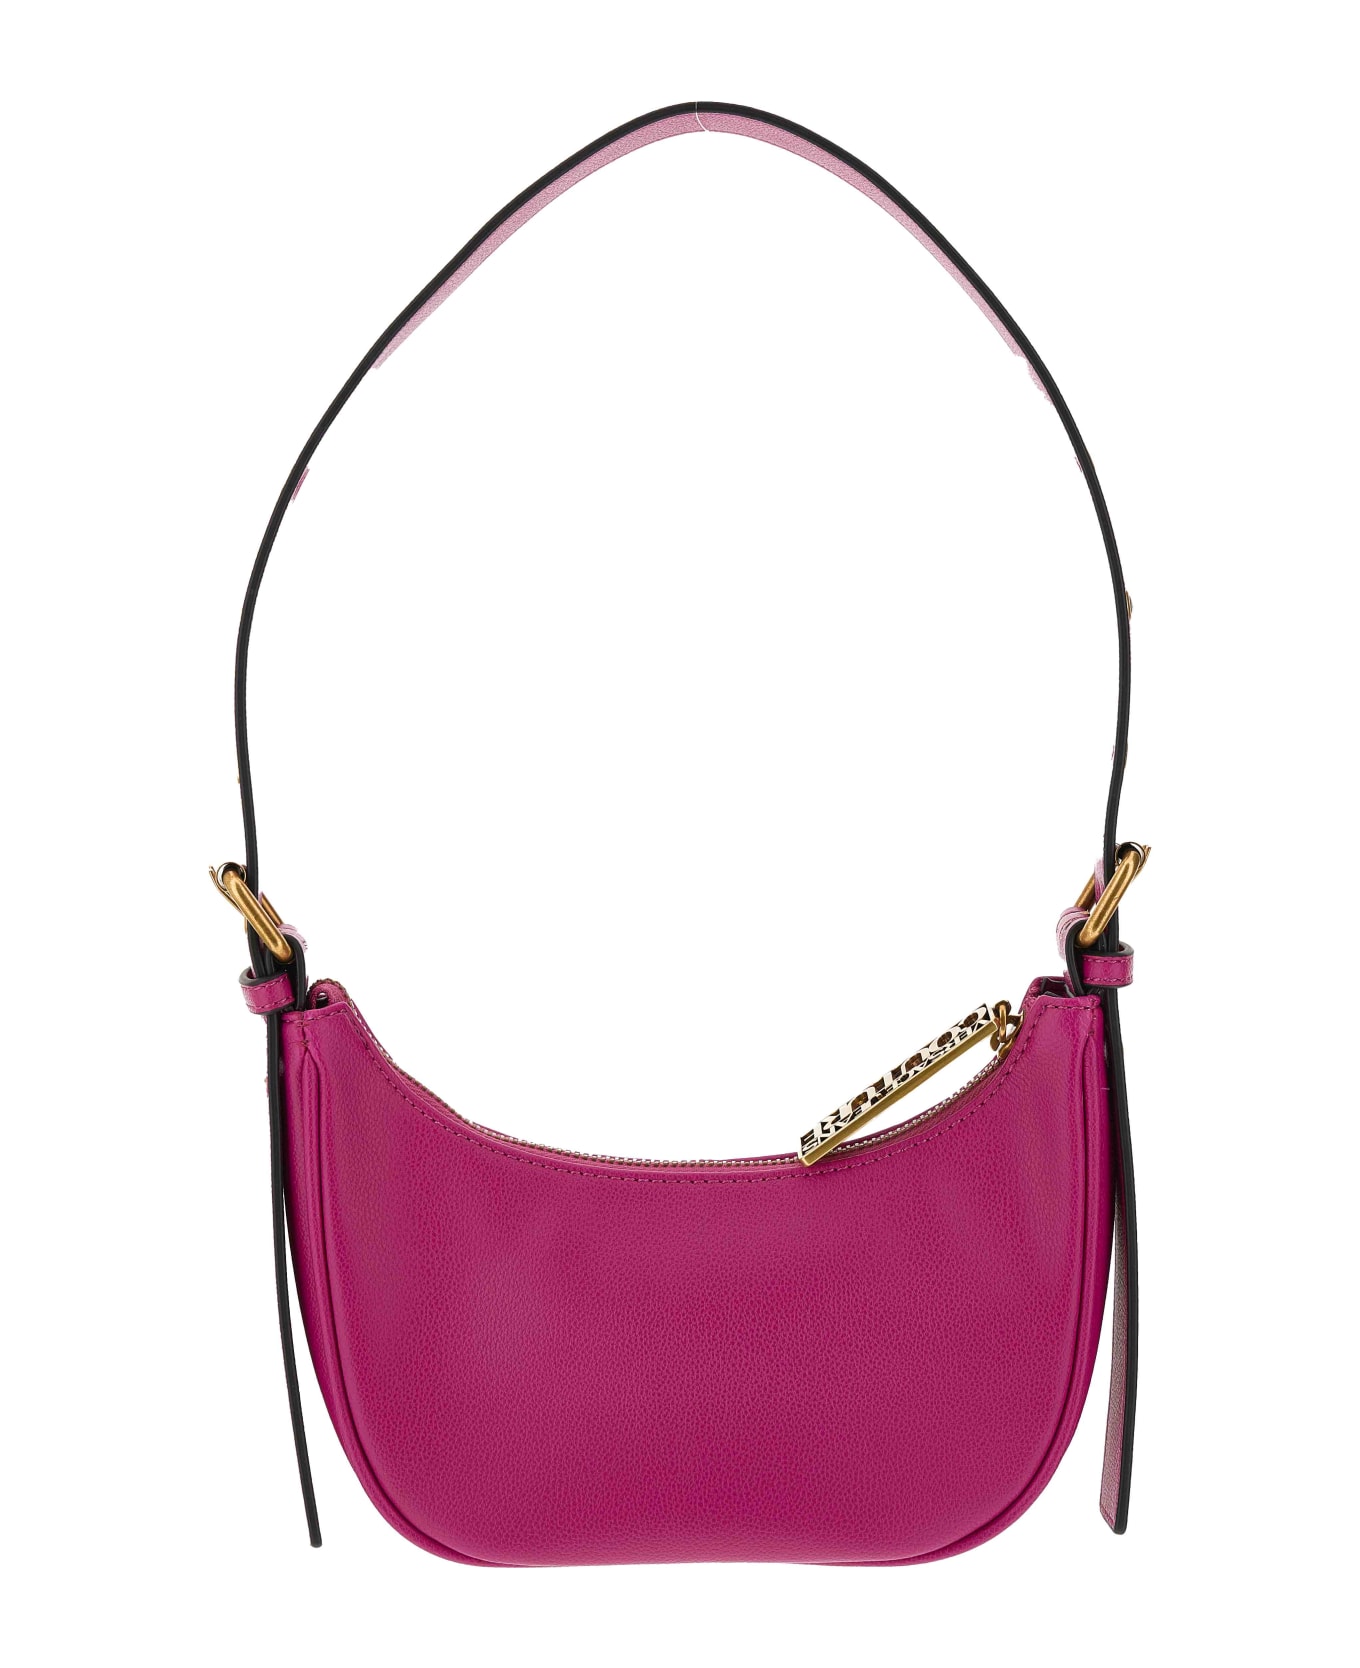 Versace Jeans Couture Bag - ORCHID トートバッグ